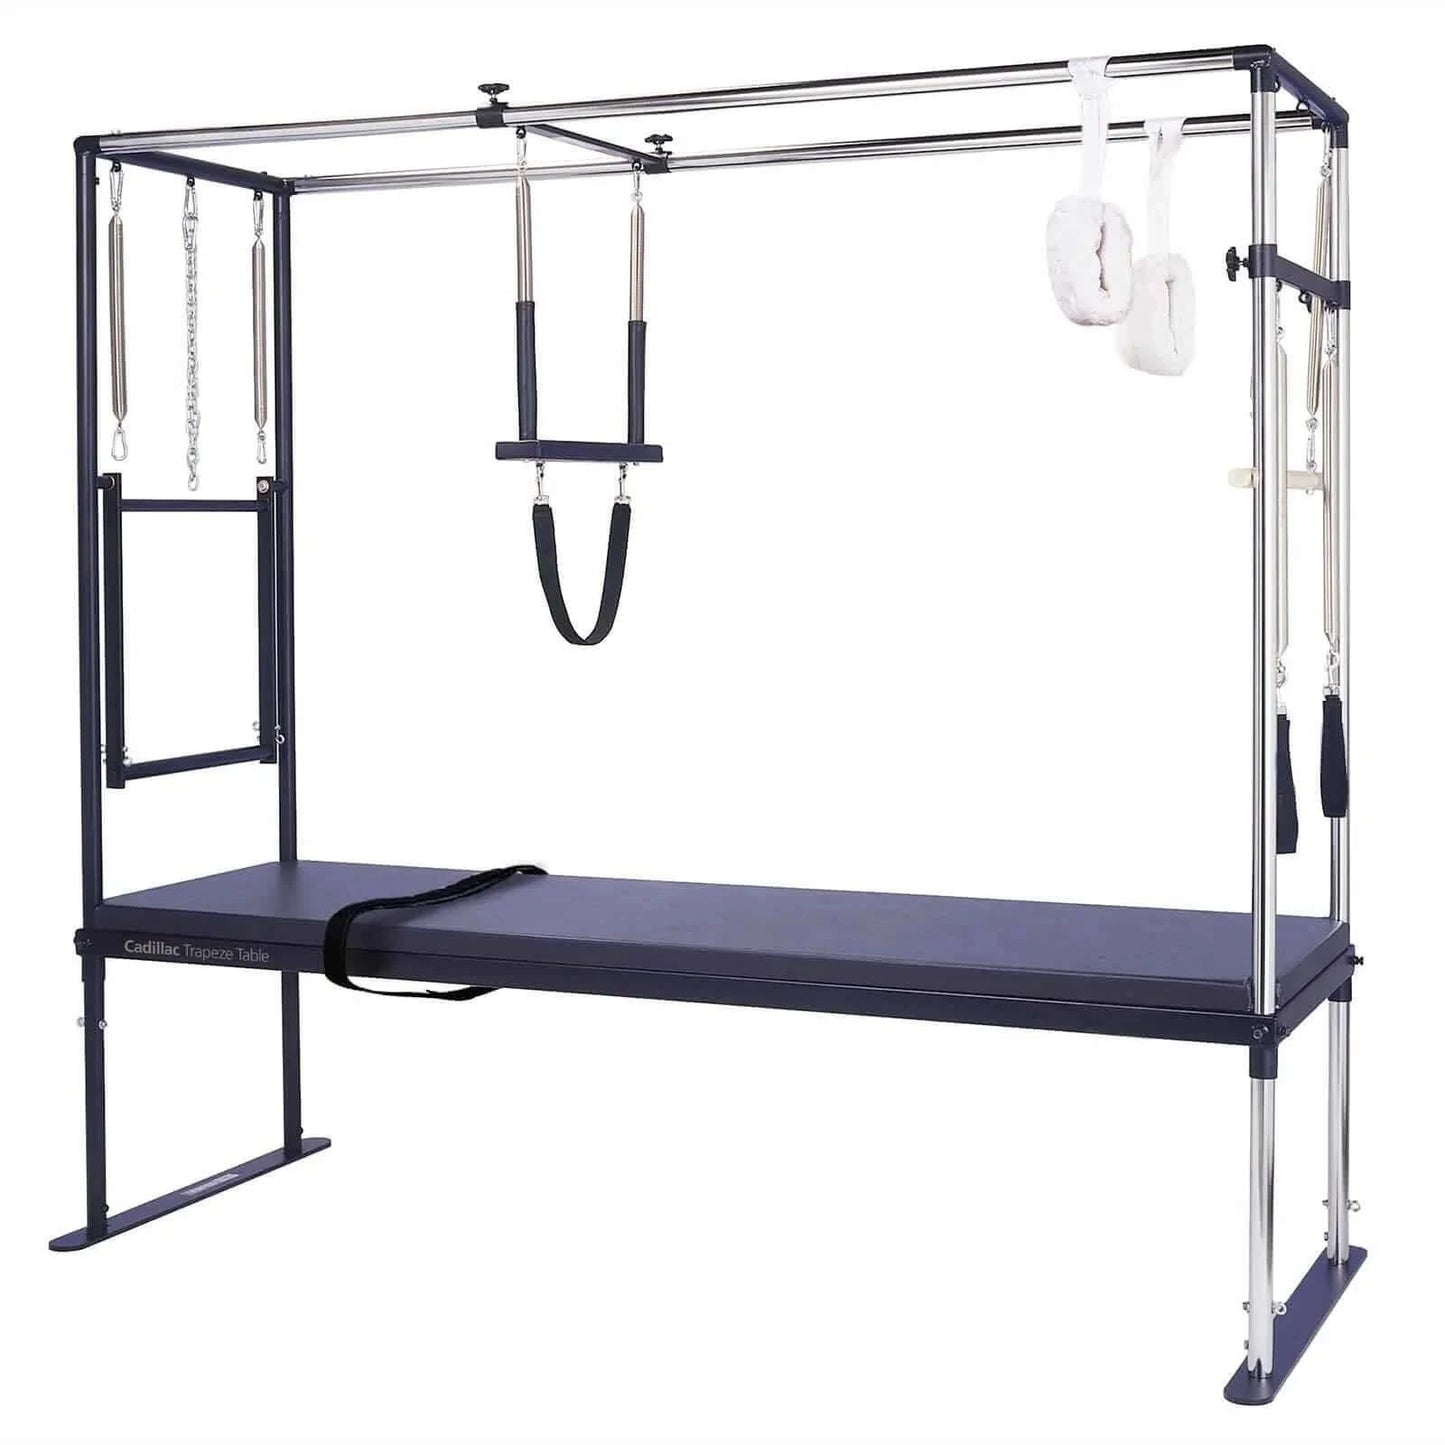 Eclipse Merrithew™ Pilates Cadillac / Trapeze Table by Merrithew™ sold by Pilates Matters® by BSP LLC